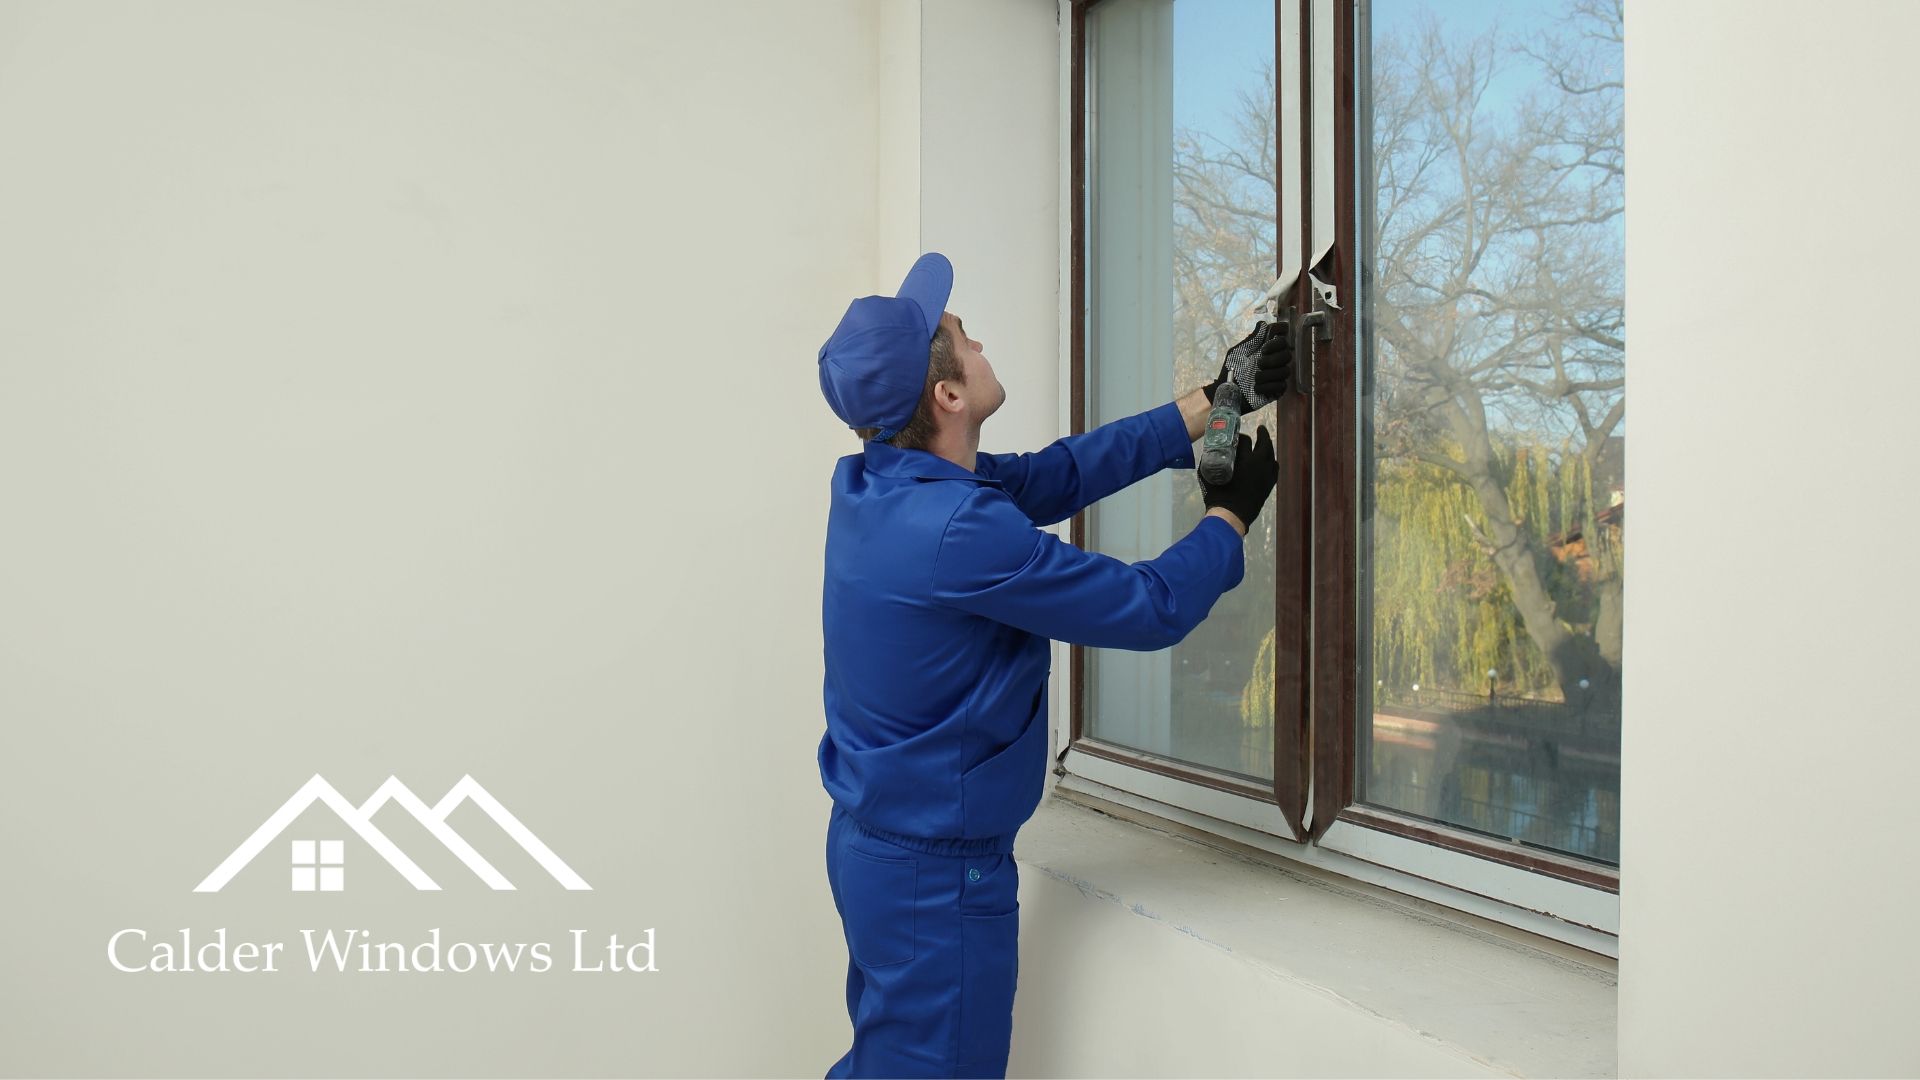 In a sea of choices, how do you find a reliable window installer you can trust? Learn how to avoid cowboy companies and find one that genuinely cares.
